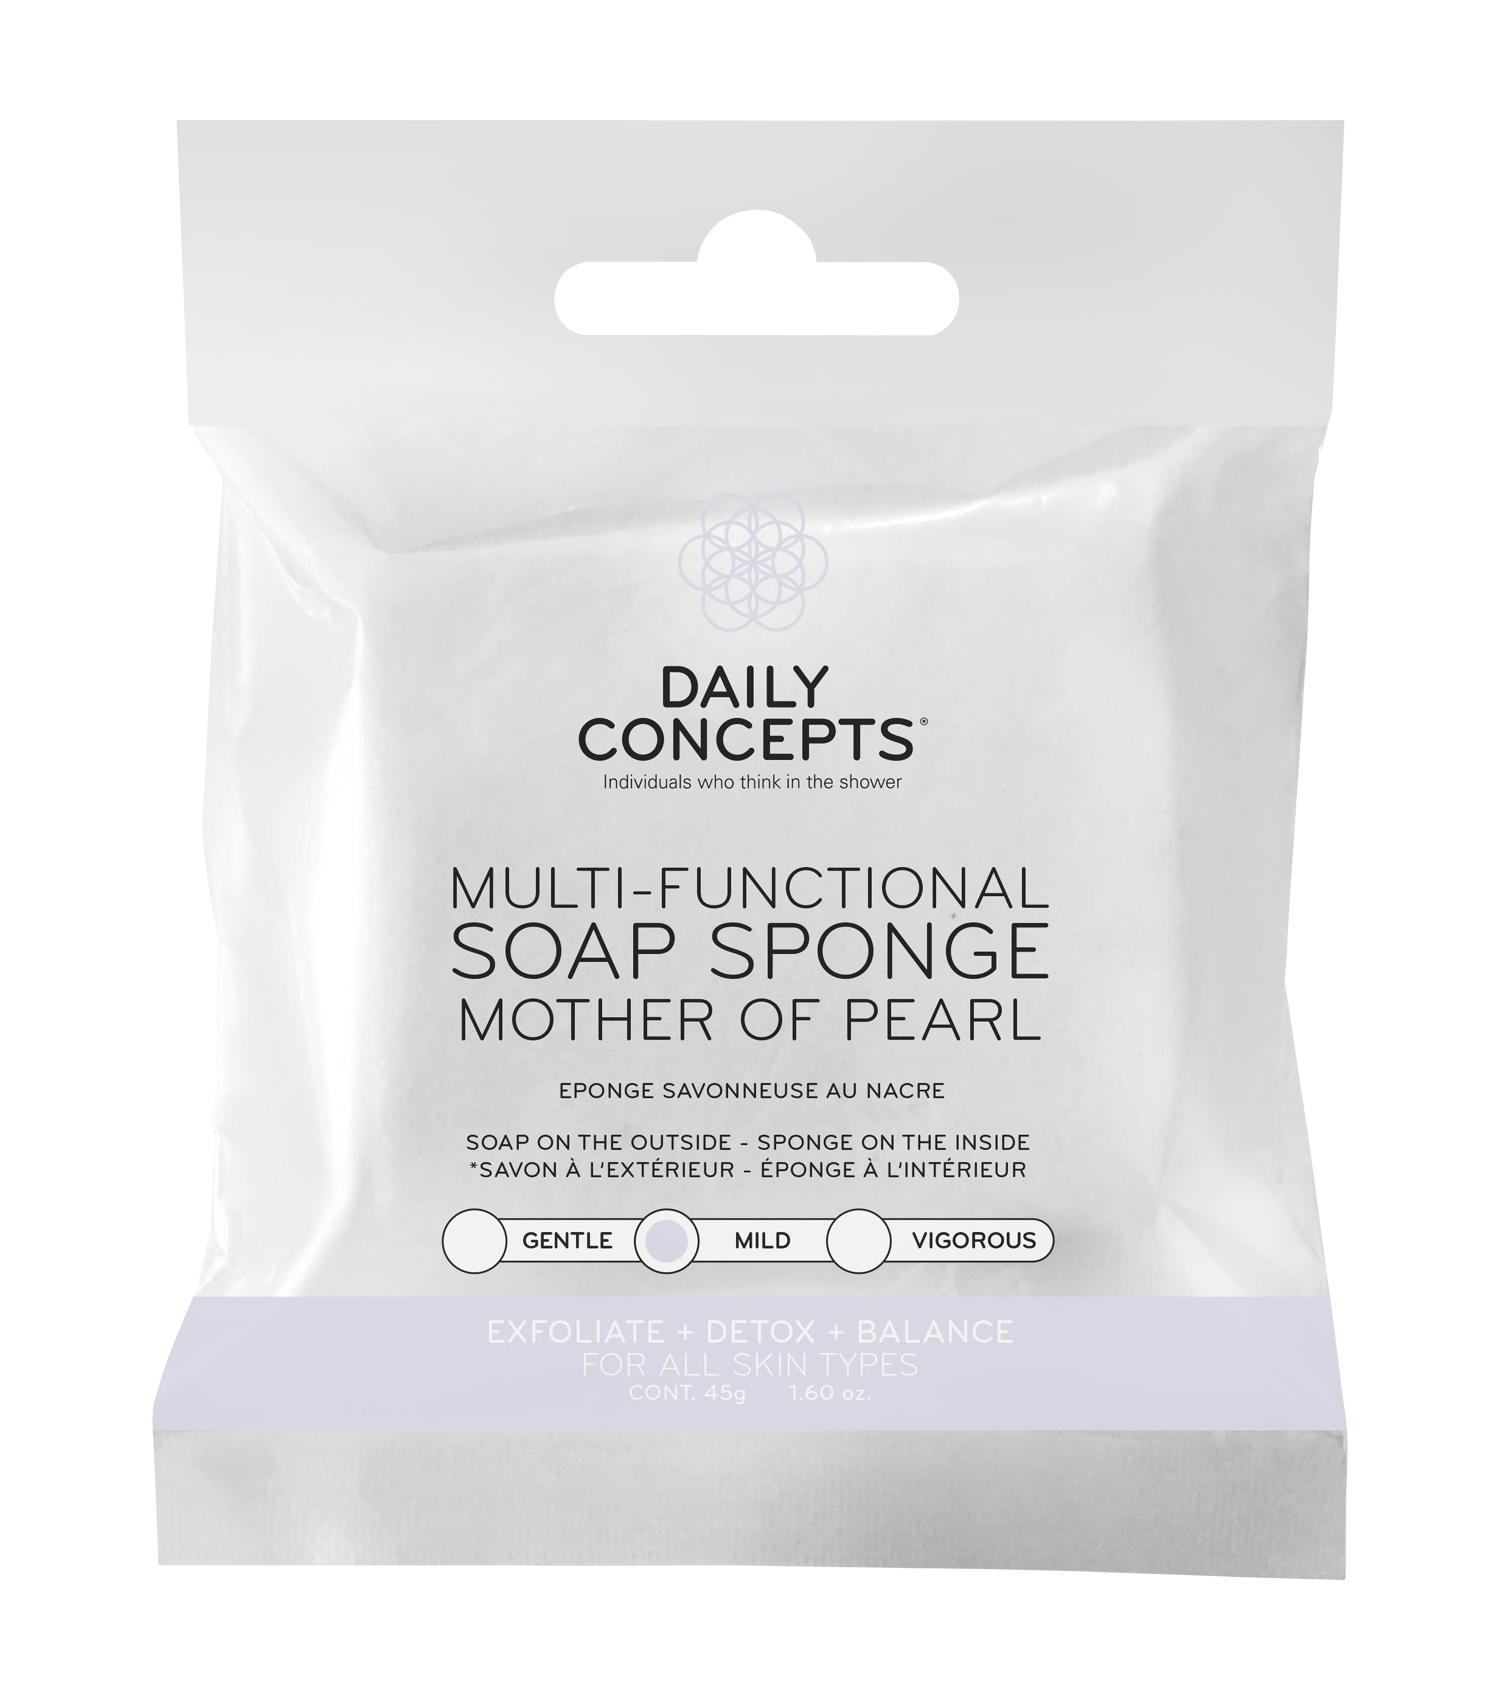 Daily Mother of Pearl Soap Sponge